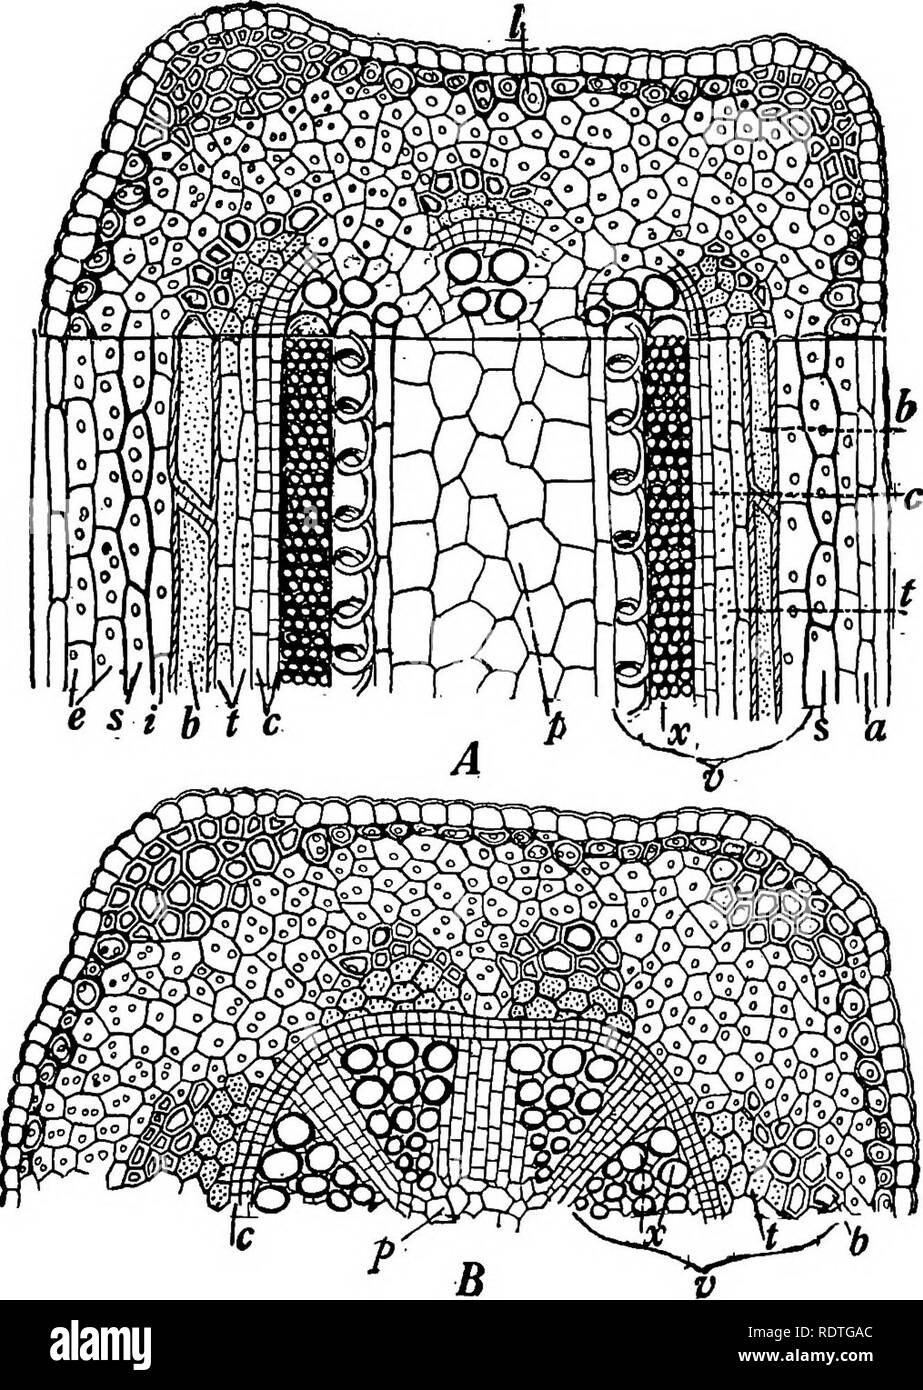 Botany With Agricultural Applications Botany Structure Of Herbaceous Dicotyledonous Stems 193 Fig 172 Diagrams Of Highly Magnified Sections Of An Alfalfa Stem A Both Cross Sectional And Lengthwise Views Of